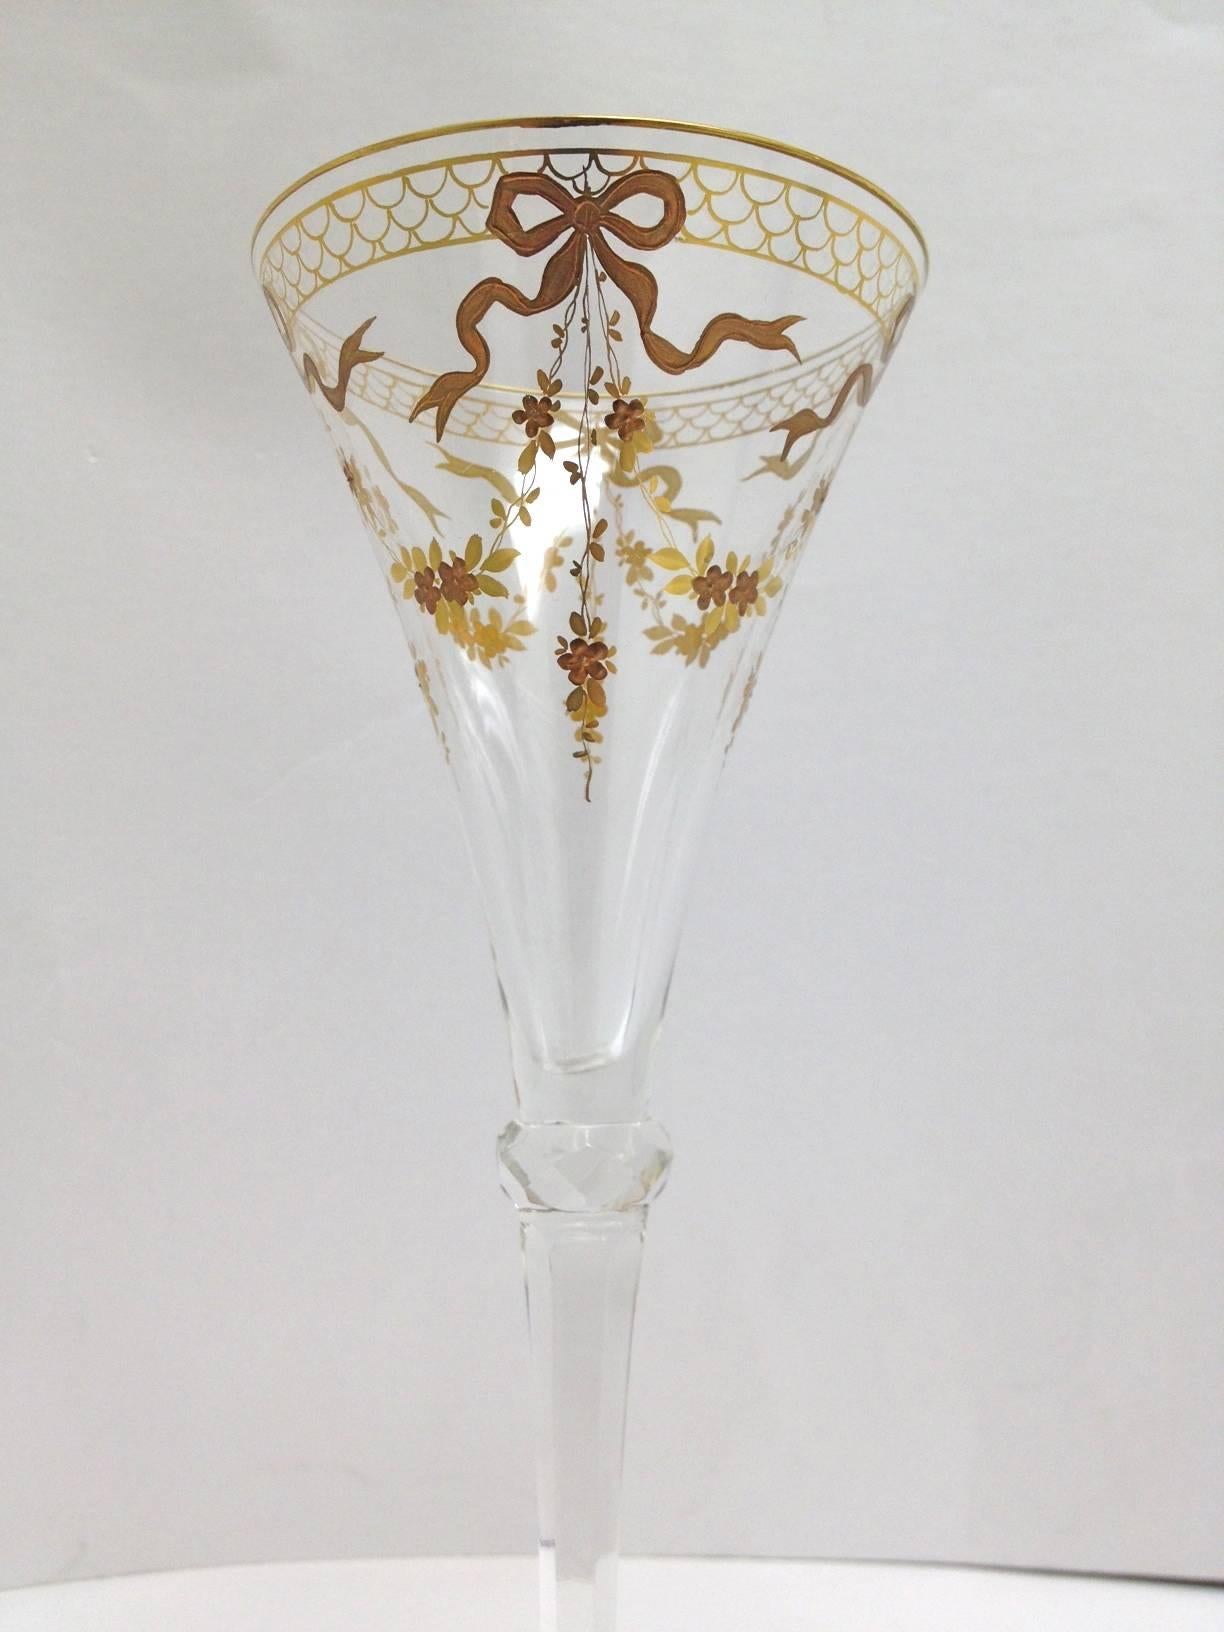 Louis XVI Nine Rare Moser Glass Campagne Flutes Richly Gilded in Two Tones, circa 1900